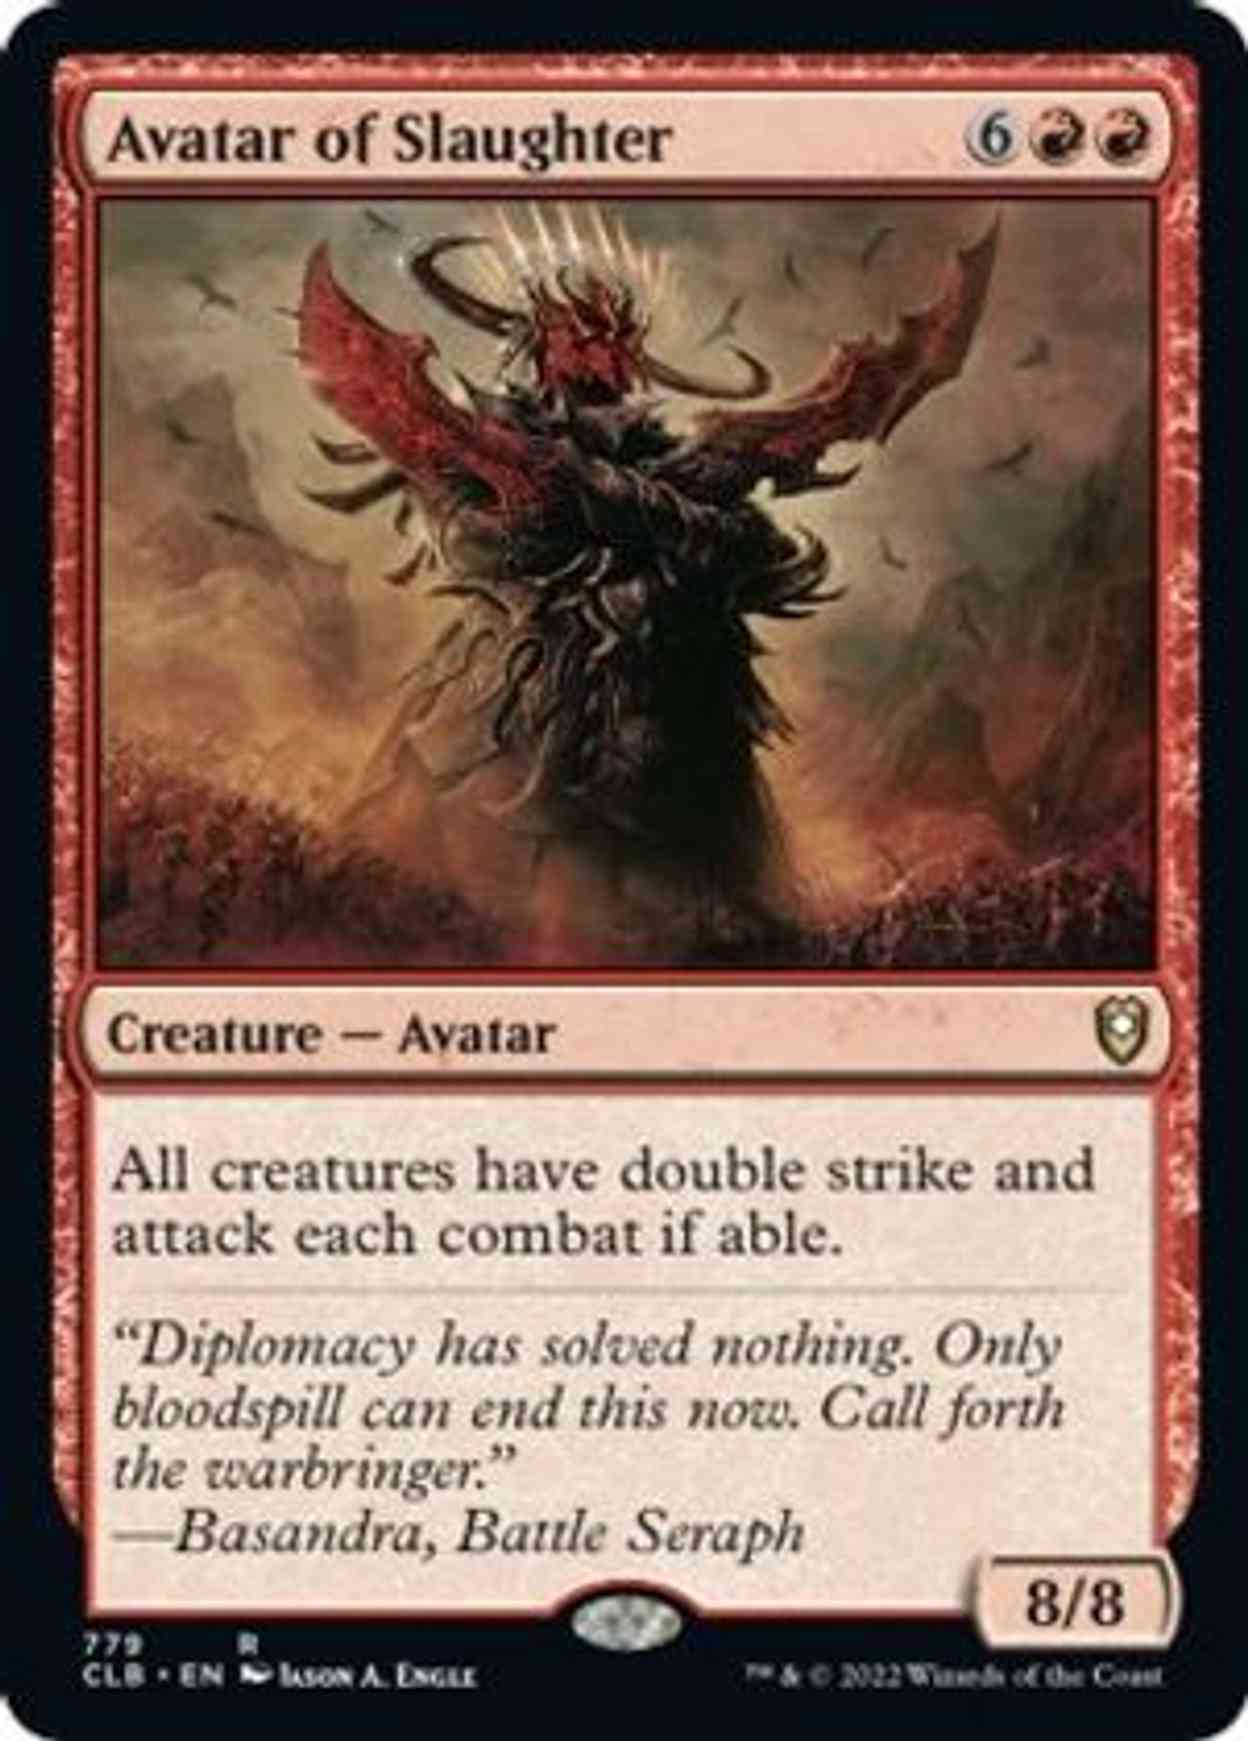 Avatar of Slaughter magic card front